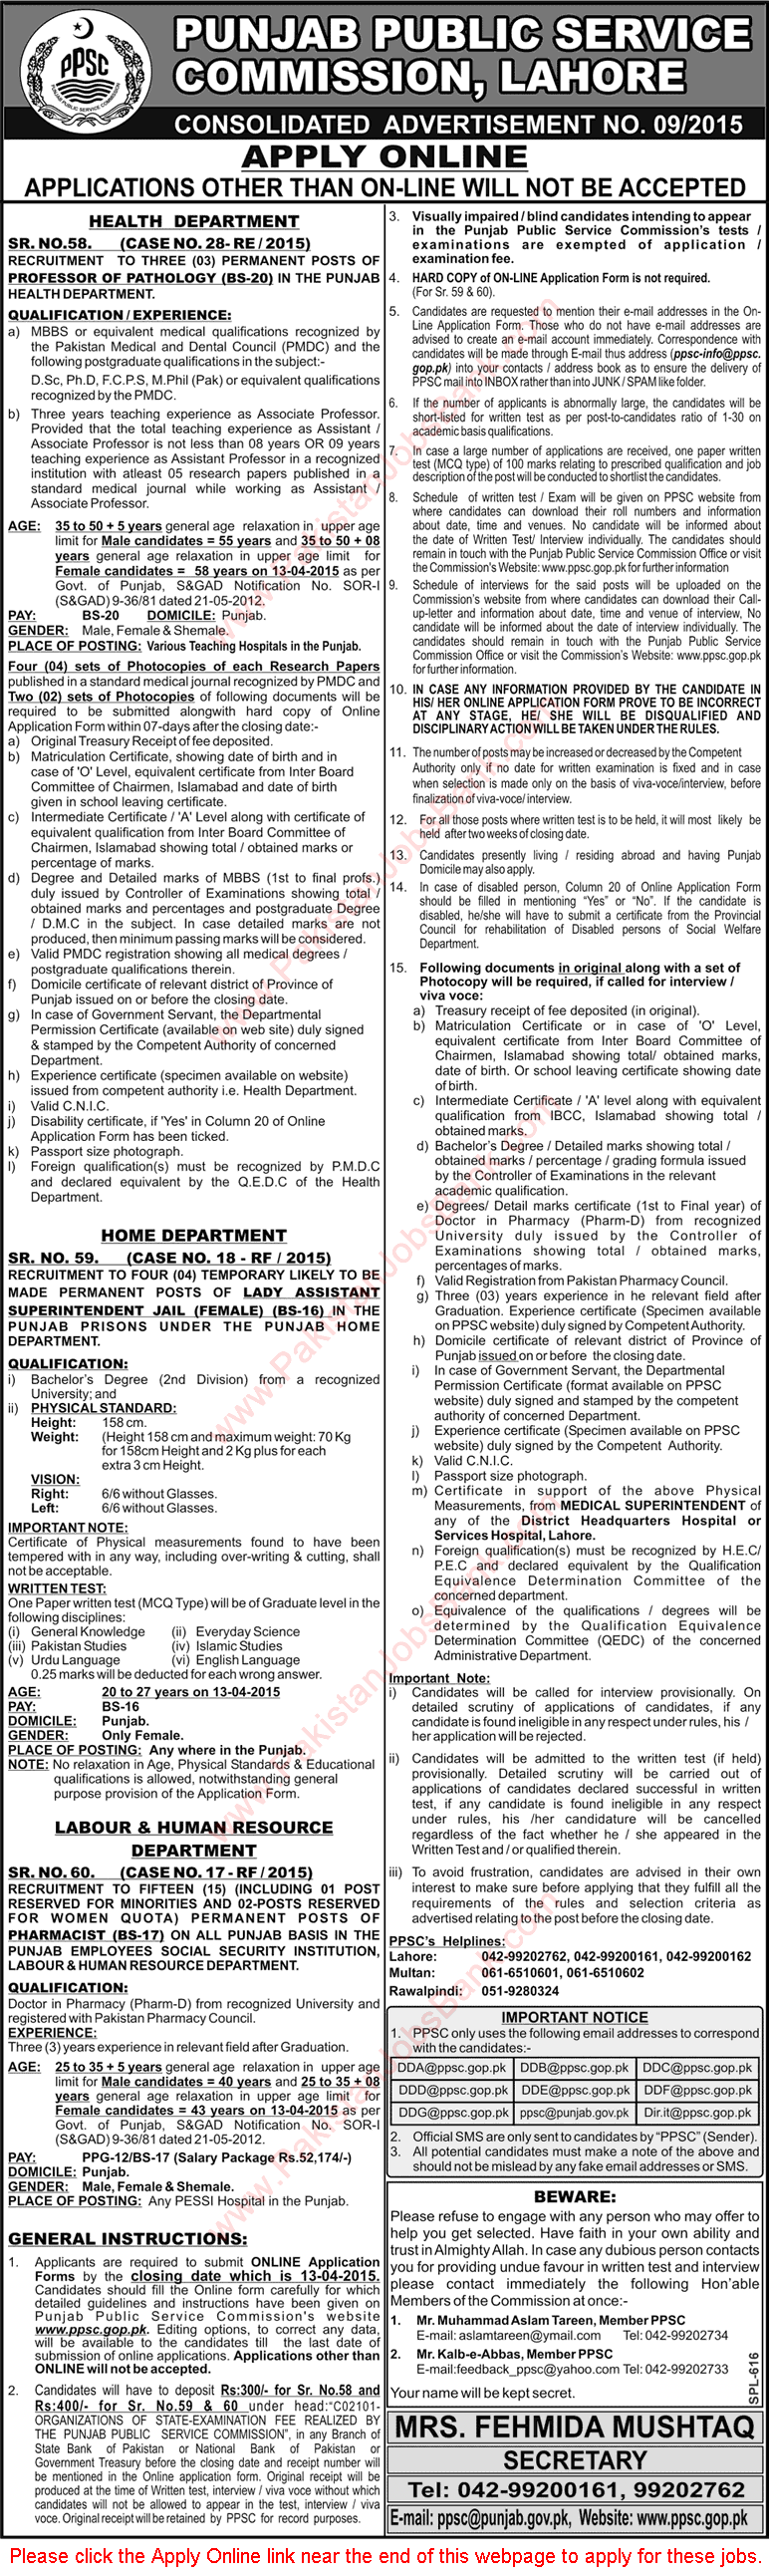 PPSC Jobs March 2015 April Apply Online Consolidated Advertisement No 09/2015 , 9/2015